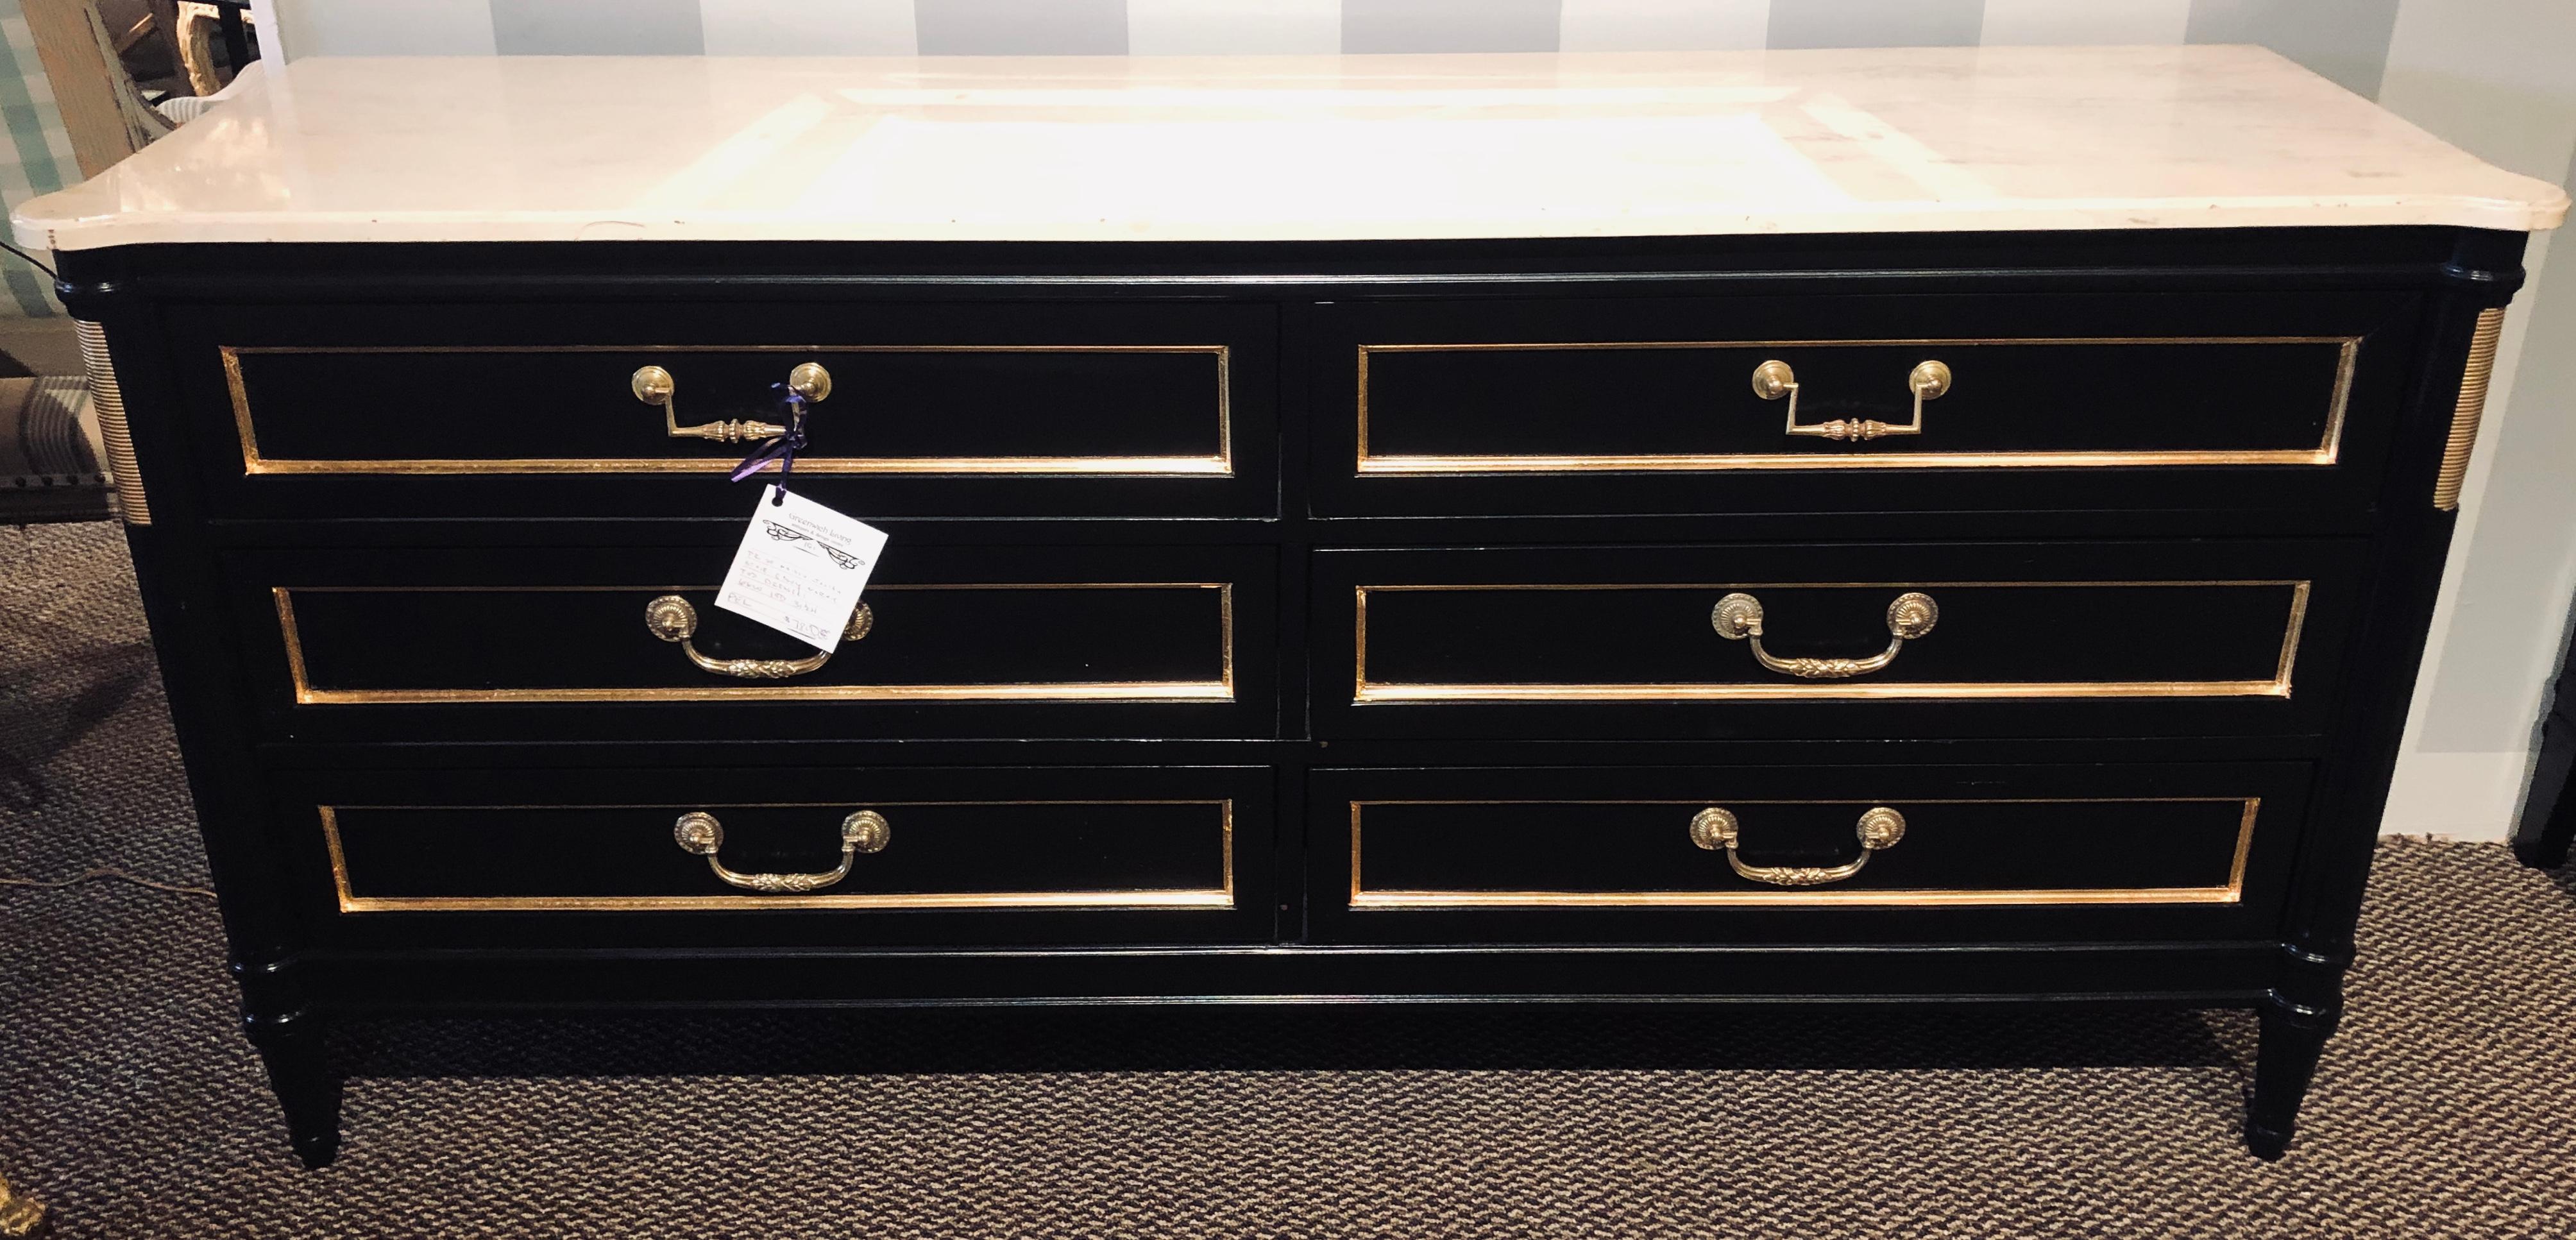 Pair of Maison Jansen style ebony marble-top dressers commodes chest of drawers. Each in the Louis XVI style with ebony and bronze adorned decoration this stunning pair of palatial servers or dresser are multi functional and can be used in many